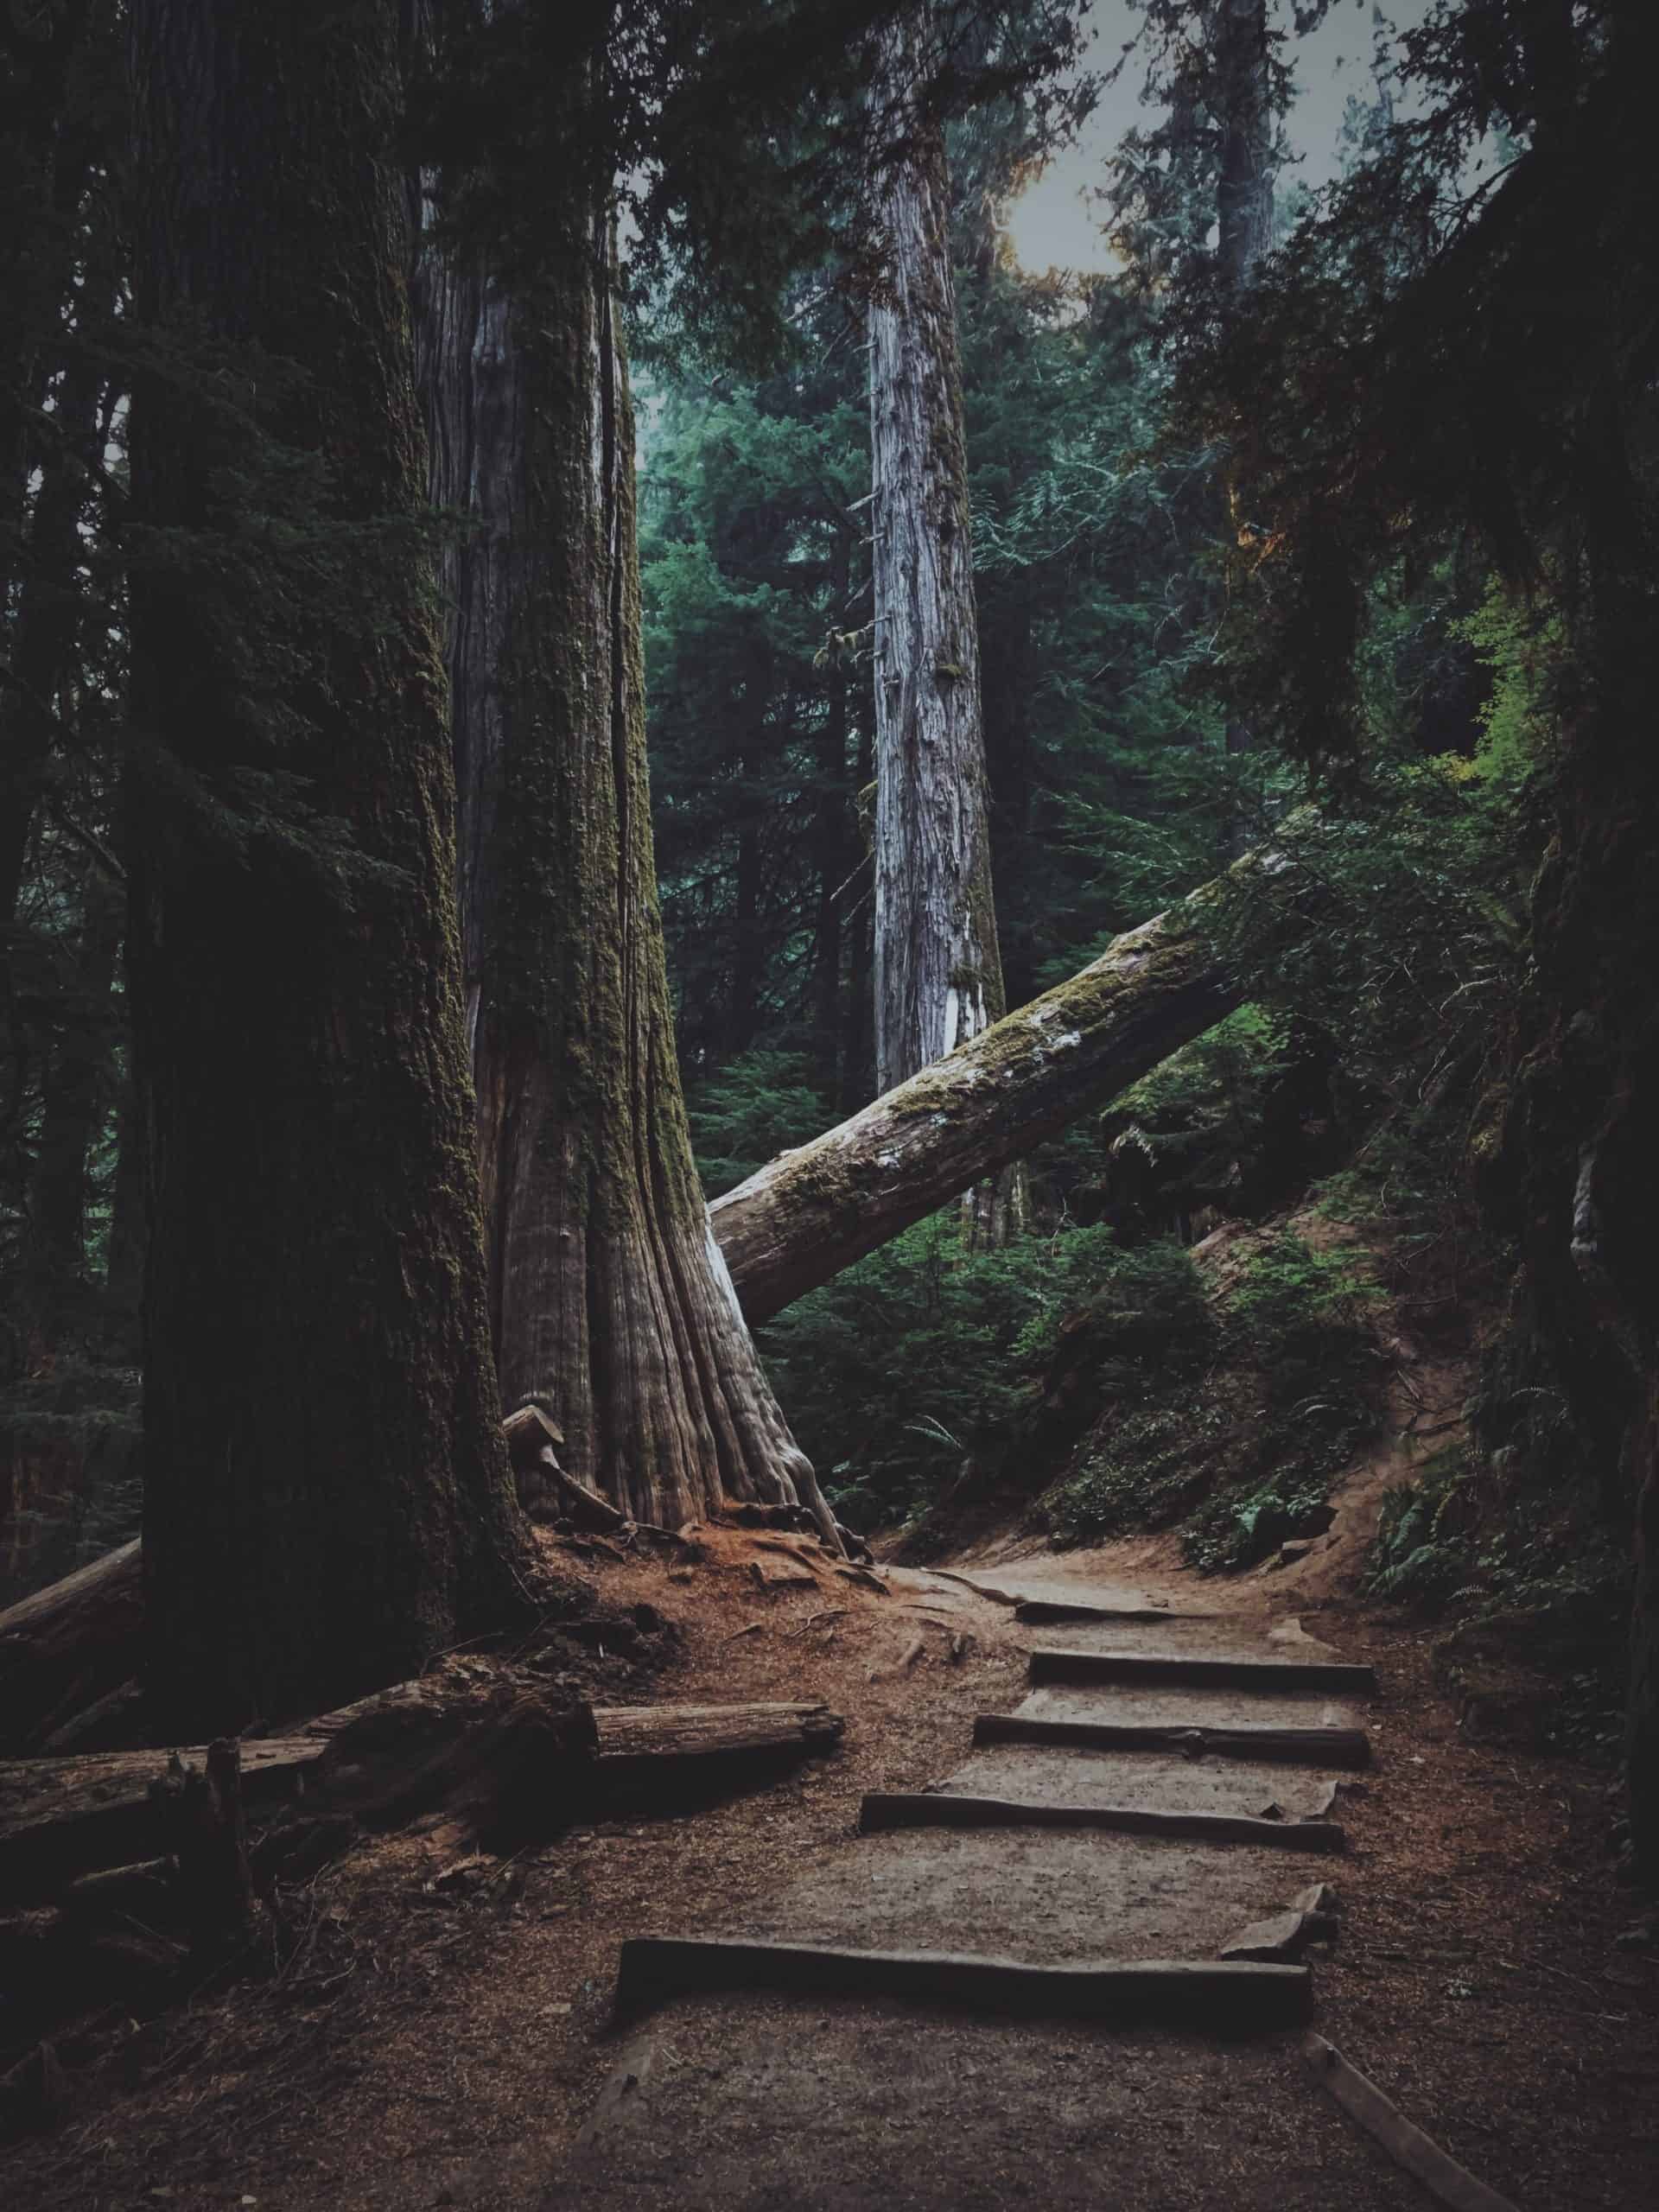 A pathway in the forest resembling how personal goal setting creates direction in life.